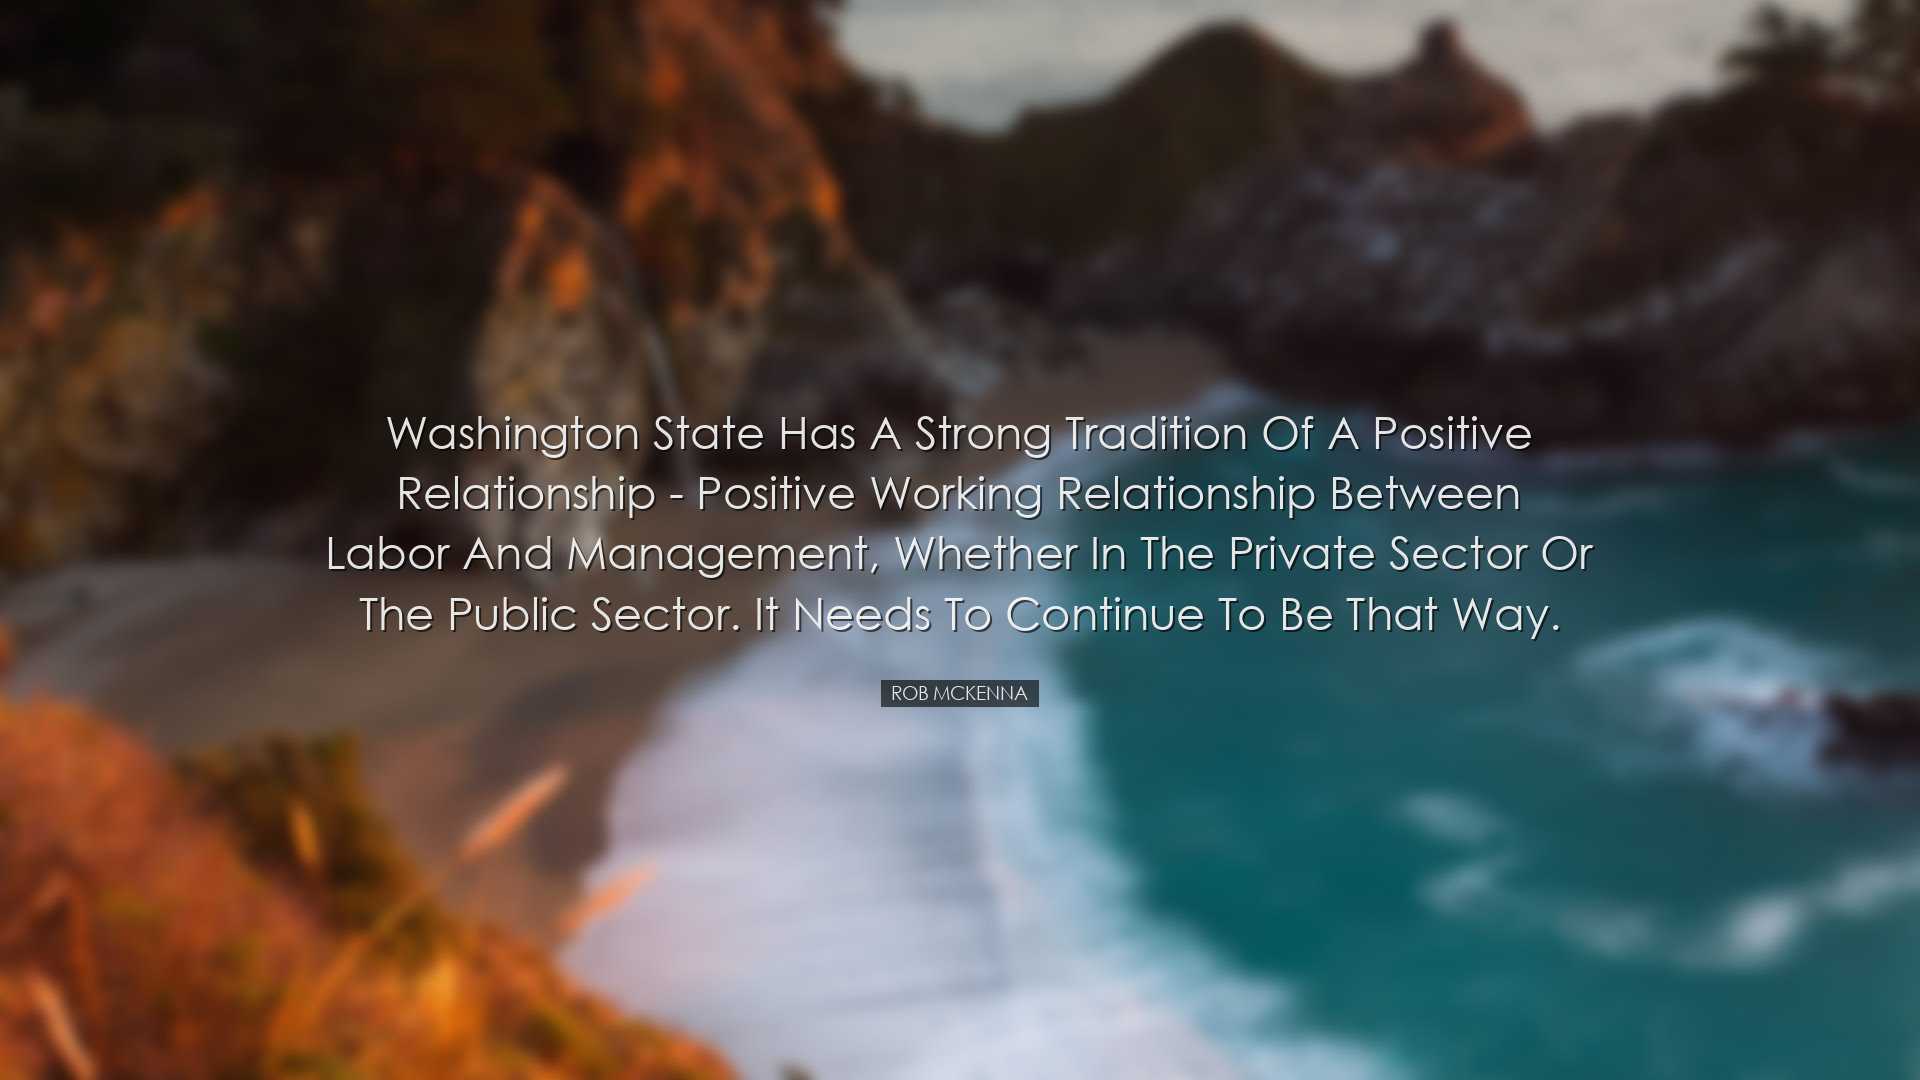 Washington State has a strong tradition of a positive relationship